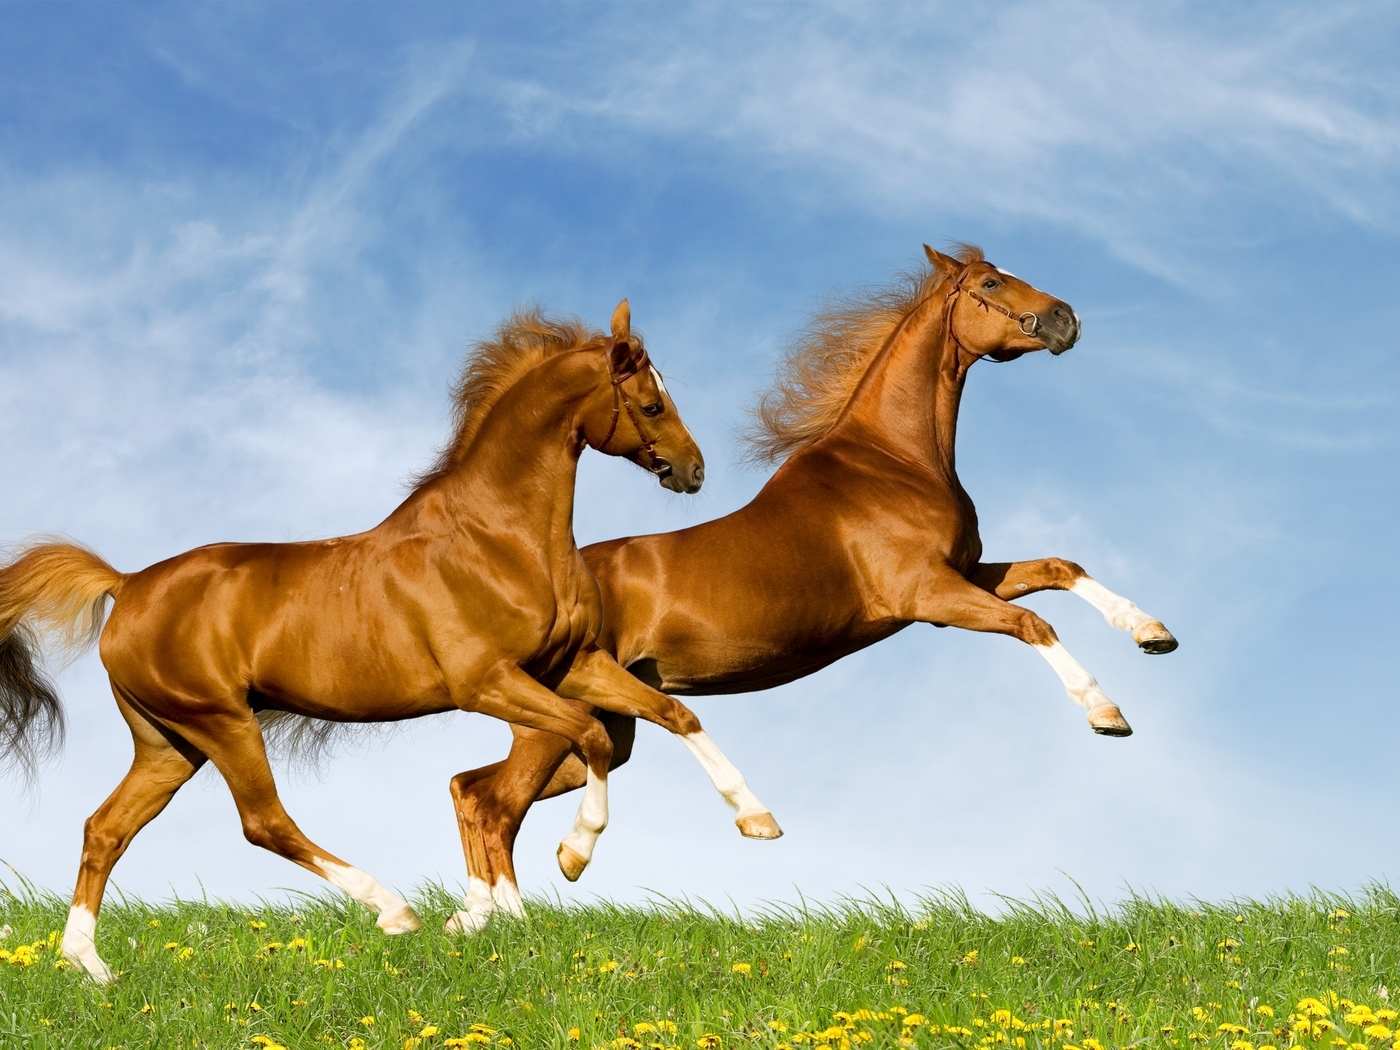 Image: Horses, pair, couple, sparkle, hooves, grass, dandelion, green, sky, clouds, spring, summer